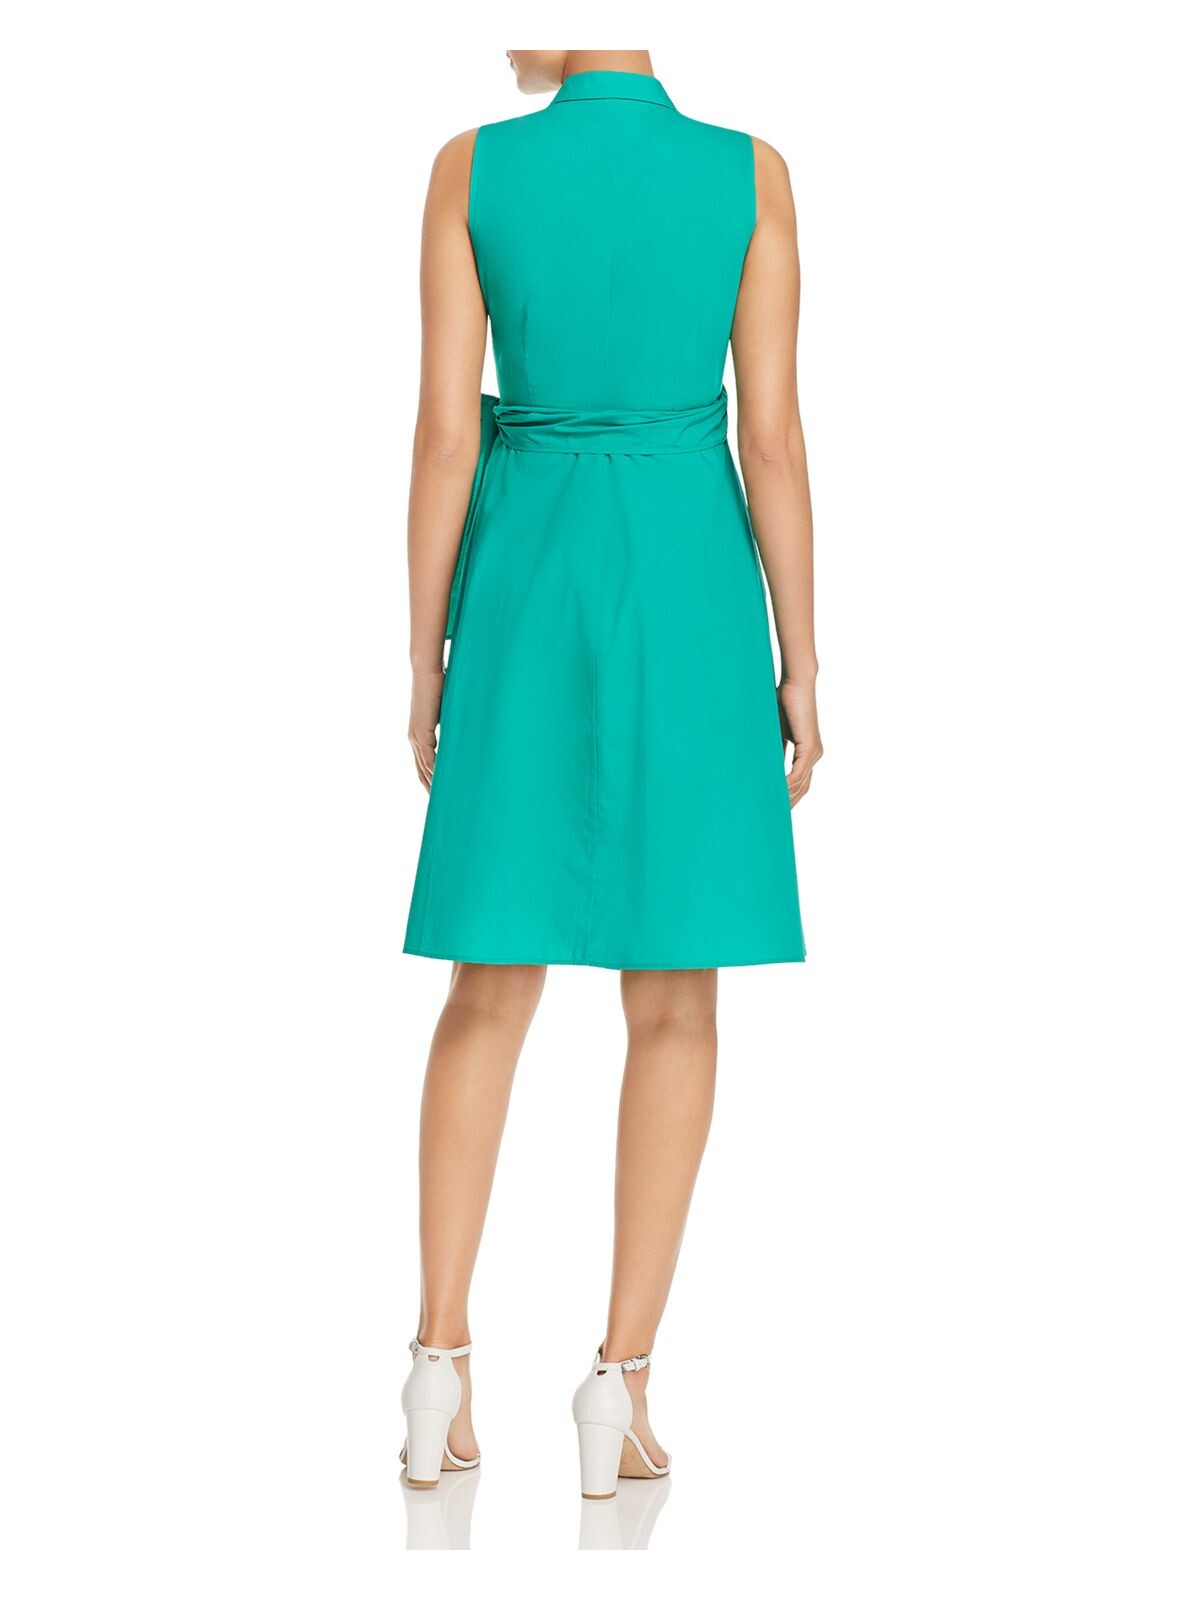 LE GALI Womens Green Tie Sleeveless Collared Knee Length Faux Wrap Dress XS